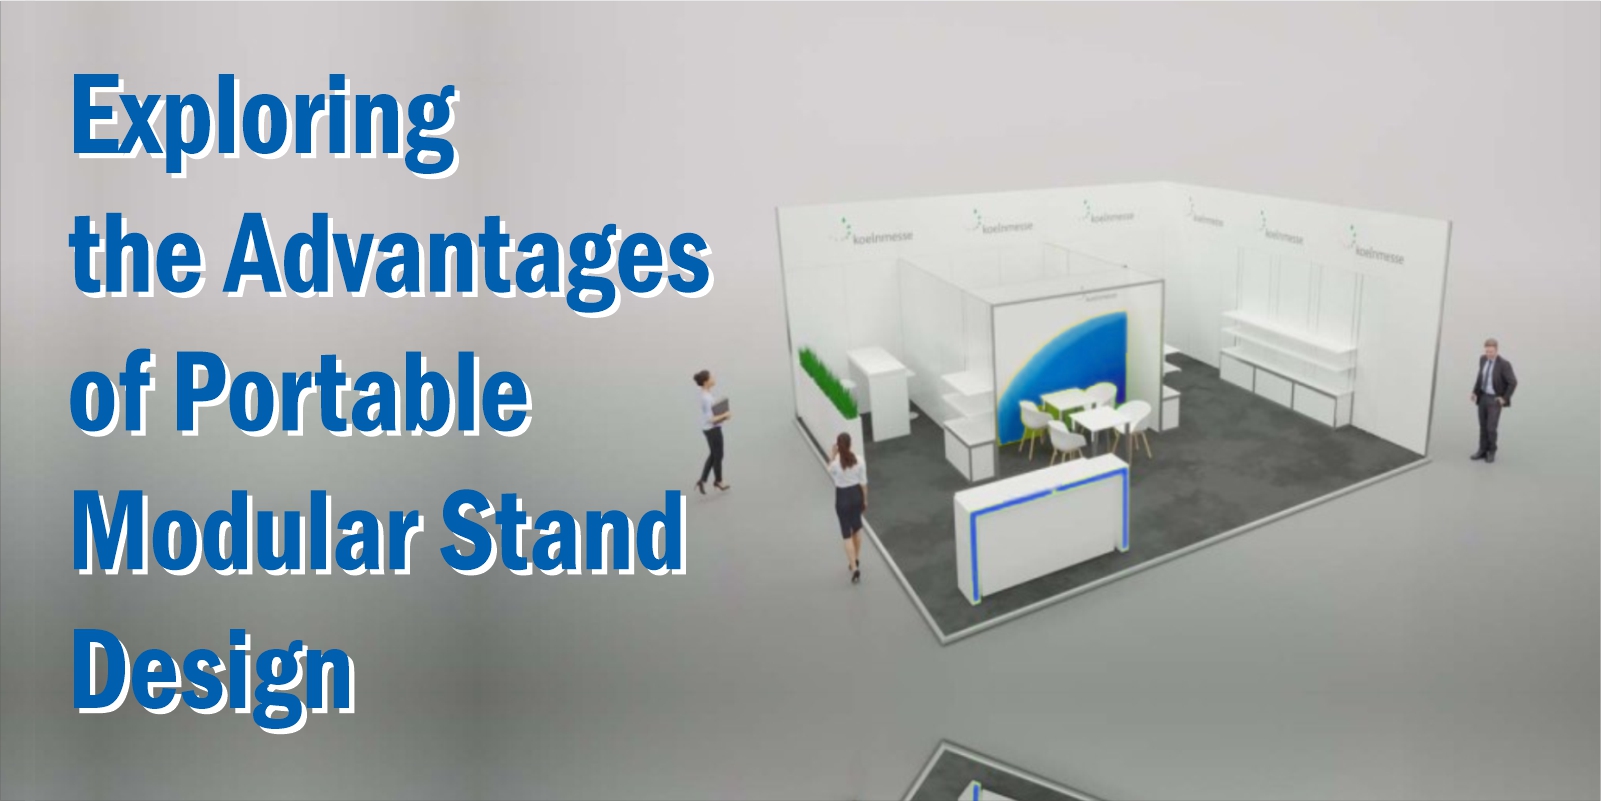 Exploring the Advantages of Portable Modular Stand Design